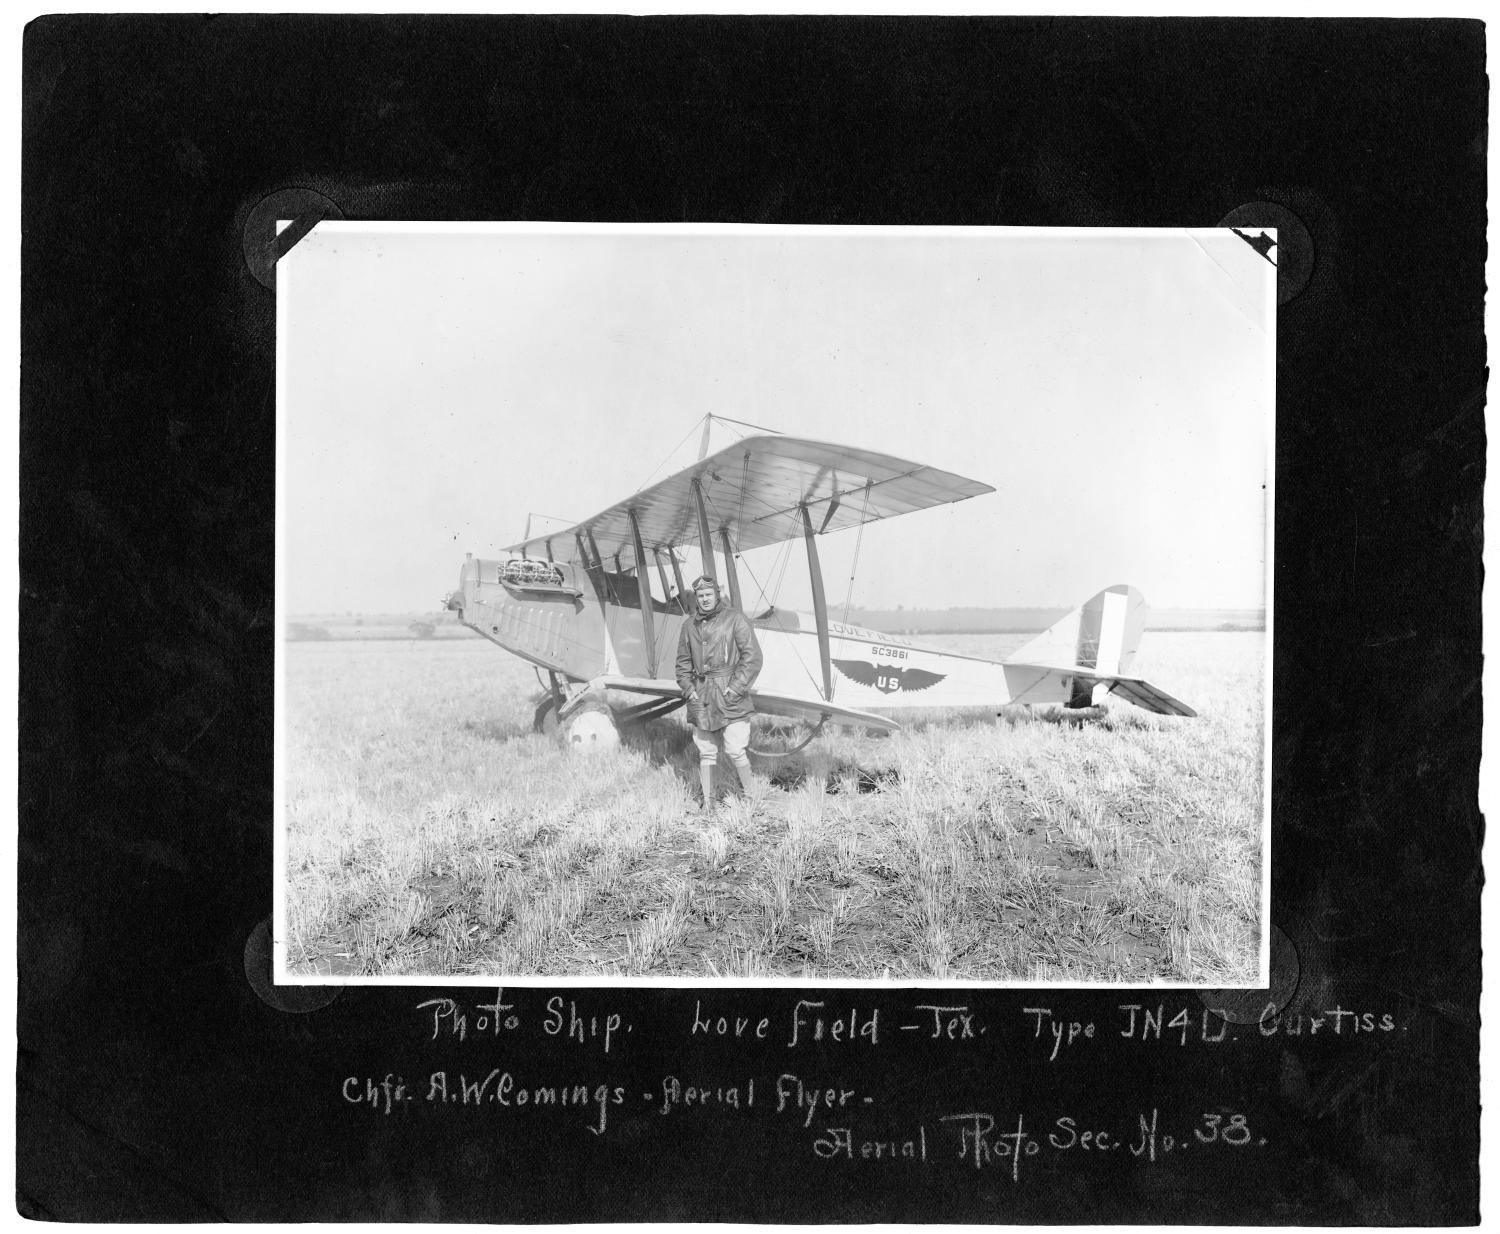 [Aerial Flyer A. W. Comings in Front of Biplane]
                                                
                                                    [Sequence #]: 1 of 1
                                                